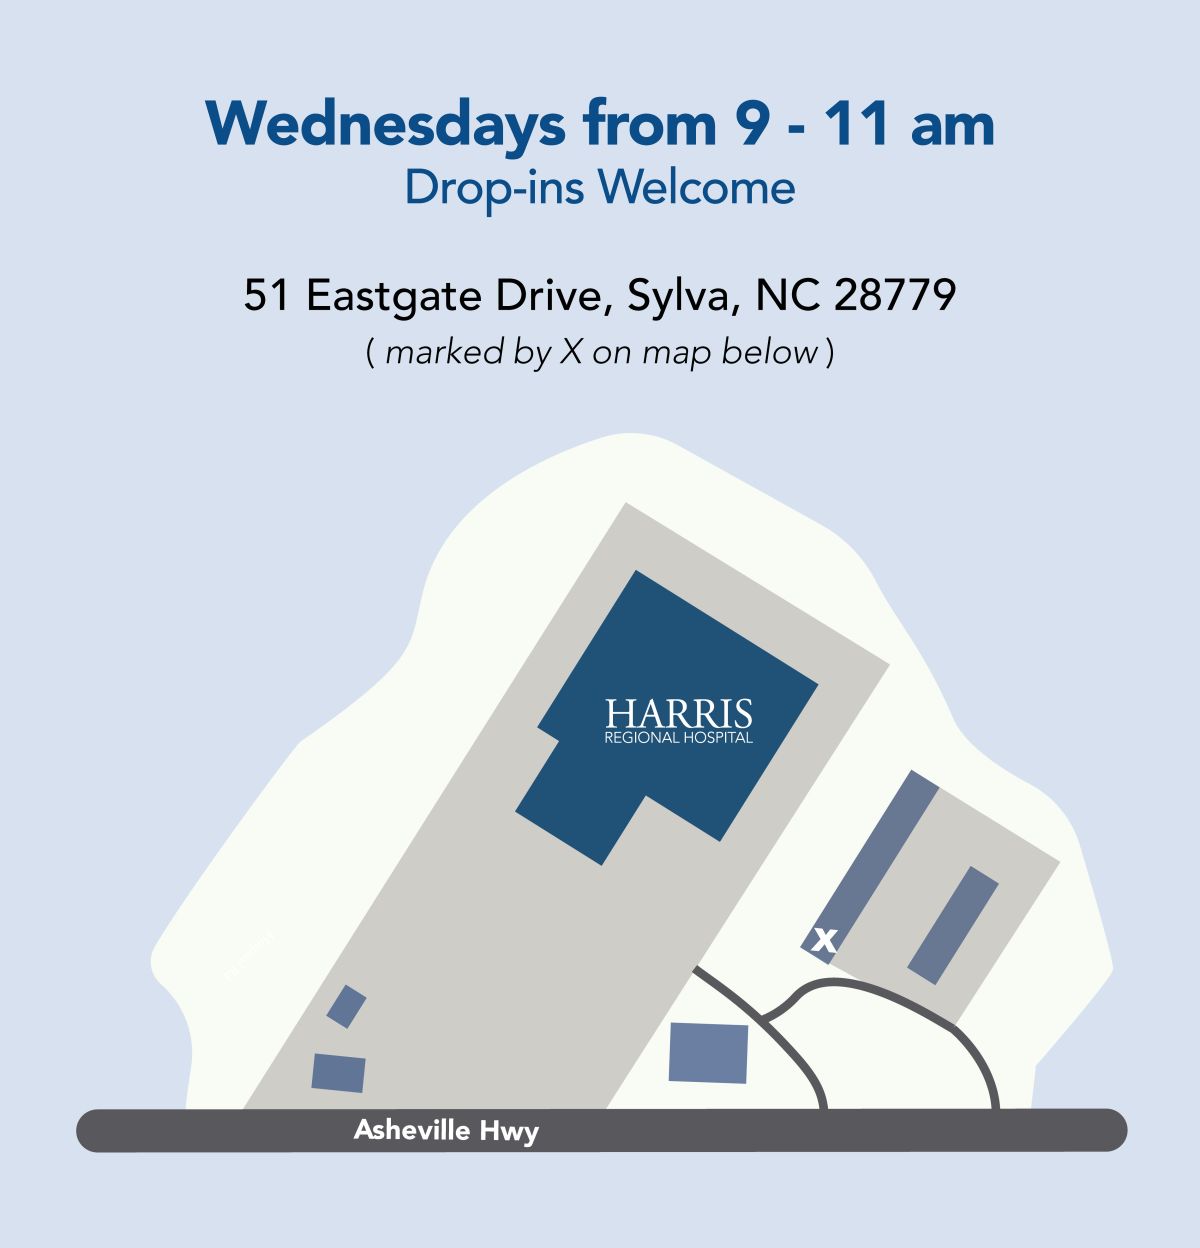 Wednesday from 9-11am. Drop-ins Welcome at 51 Eastgate Dr., Sylva, NC 28779